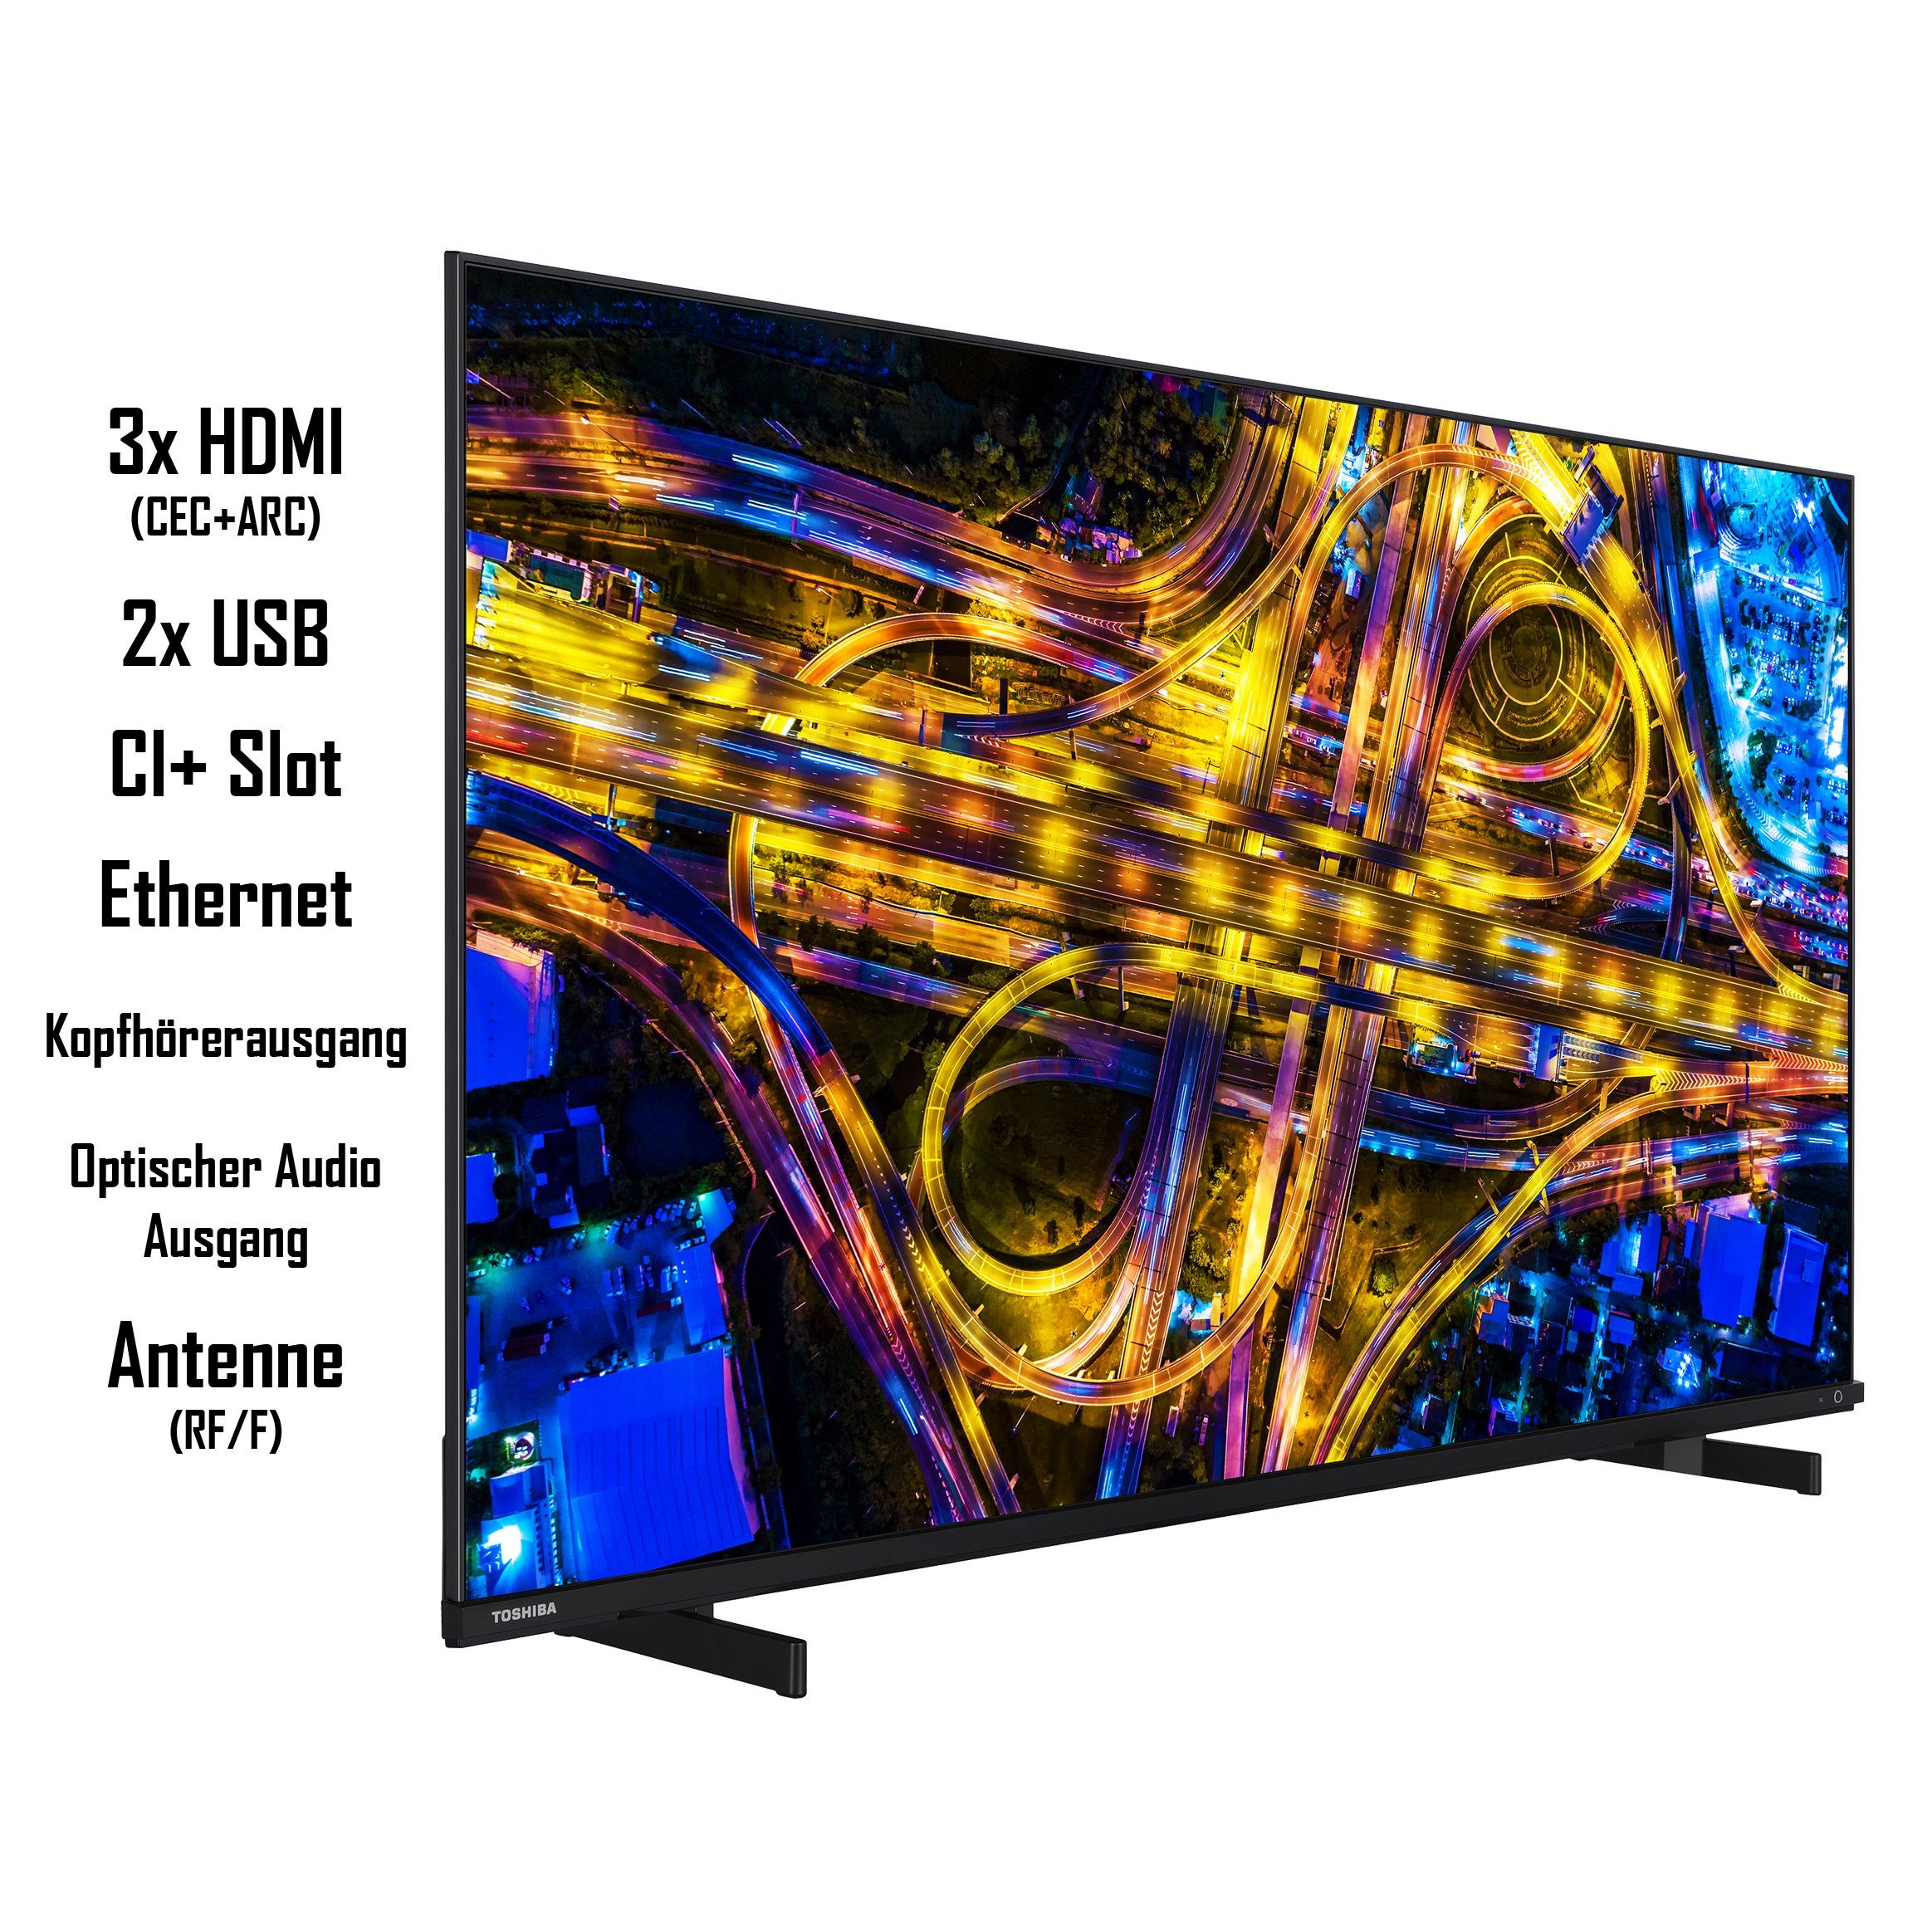 Sound Zoll, TV, Vision, HD, Ultra Smart Dolby by Fernseher (139 cm/55 WLAN) Triple-Tuner, 55UL4D63DGY 4K Onkyo, Toshiba HDR LCD-LED